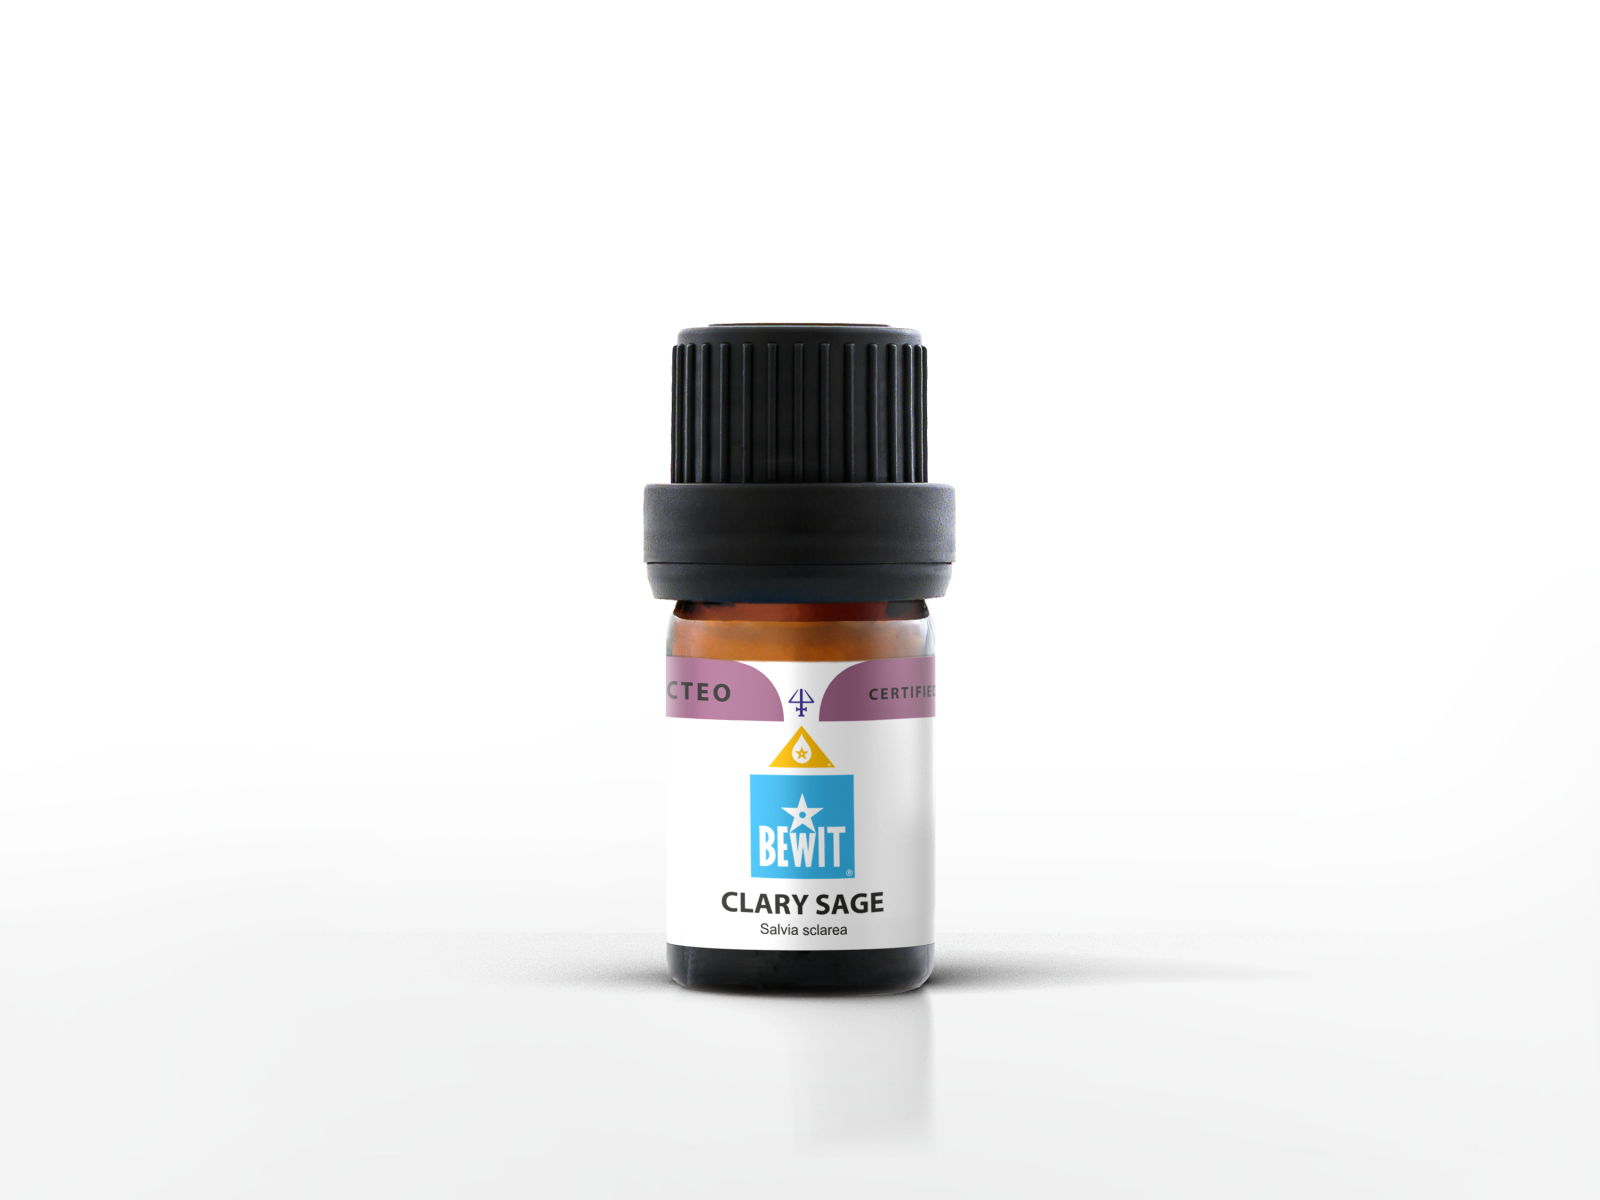 BEWIT Clary sage - It is a 100% pure essential oil - 4